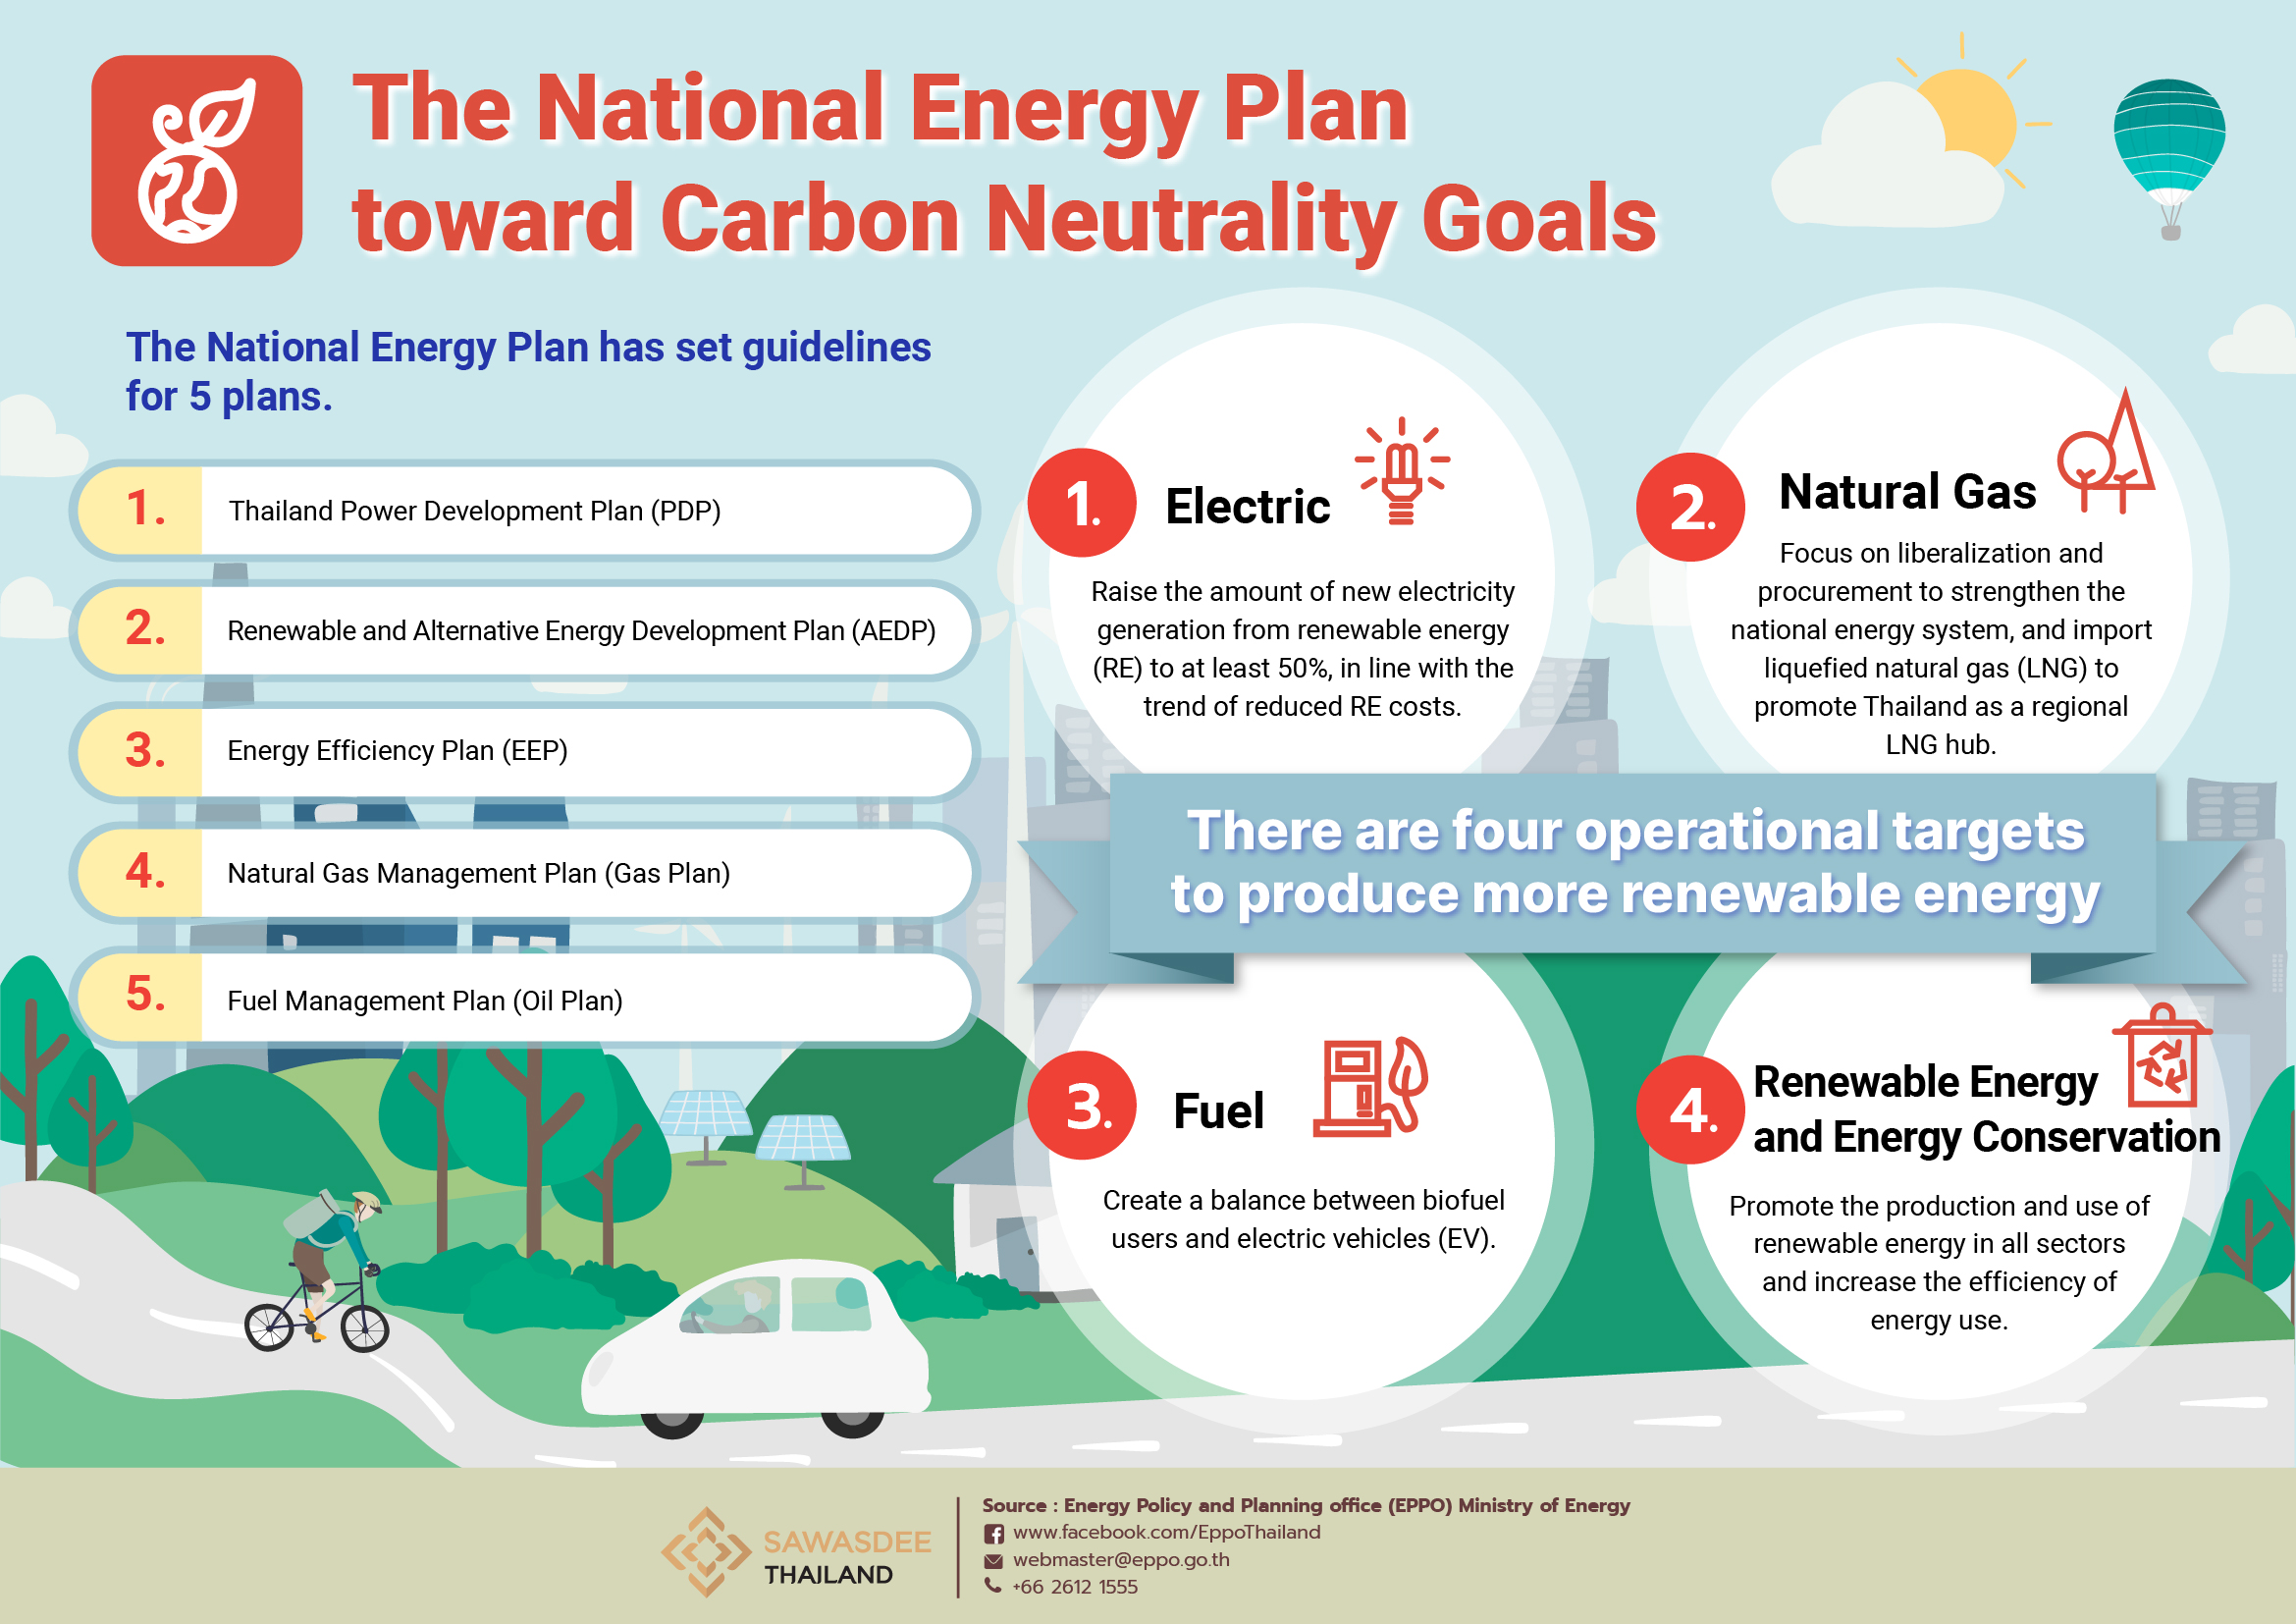 The National Energy Plan moves toward carbon neutrality goals